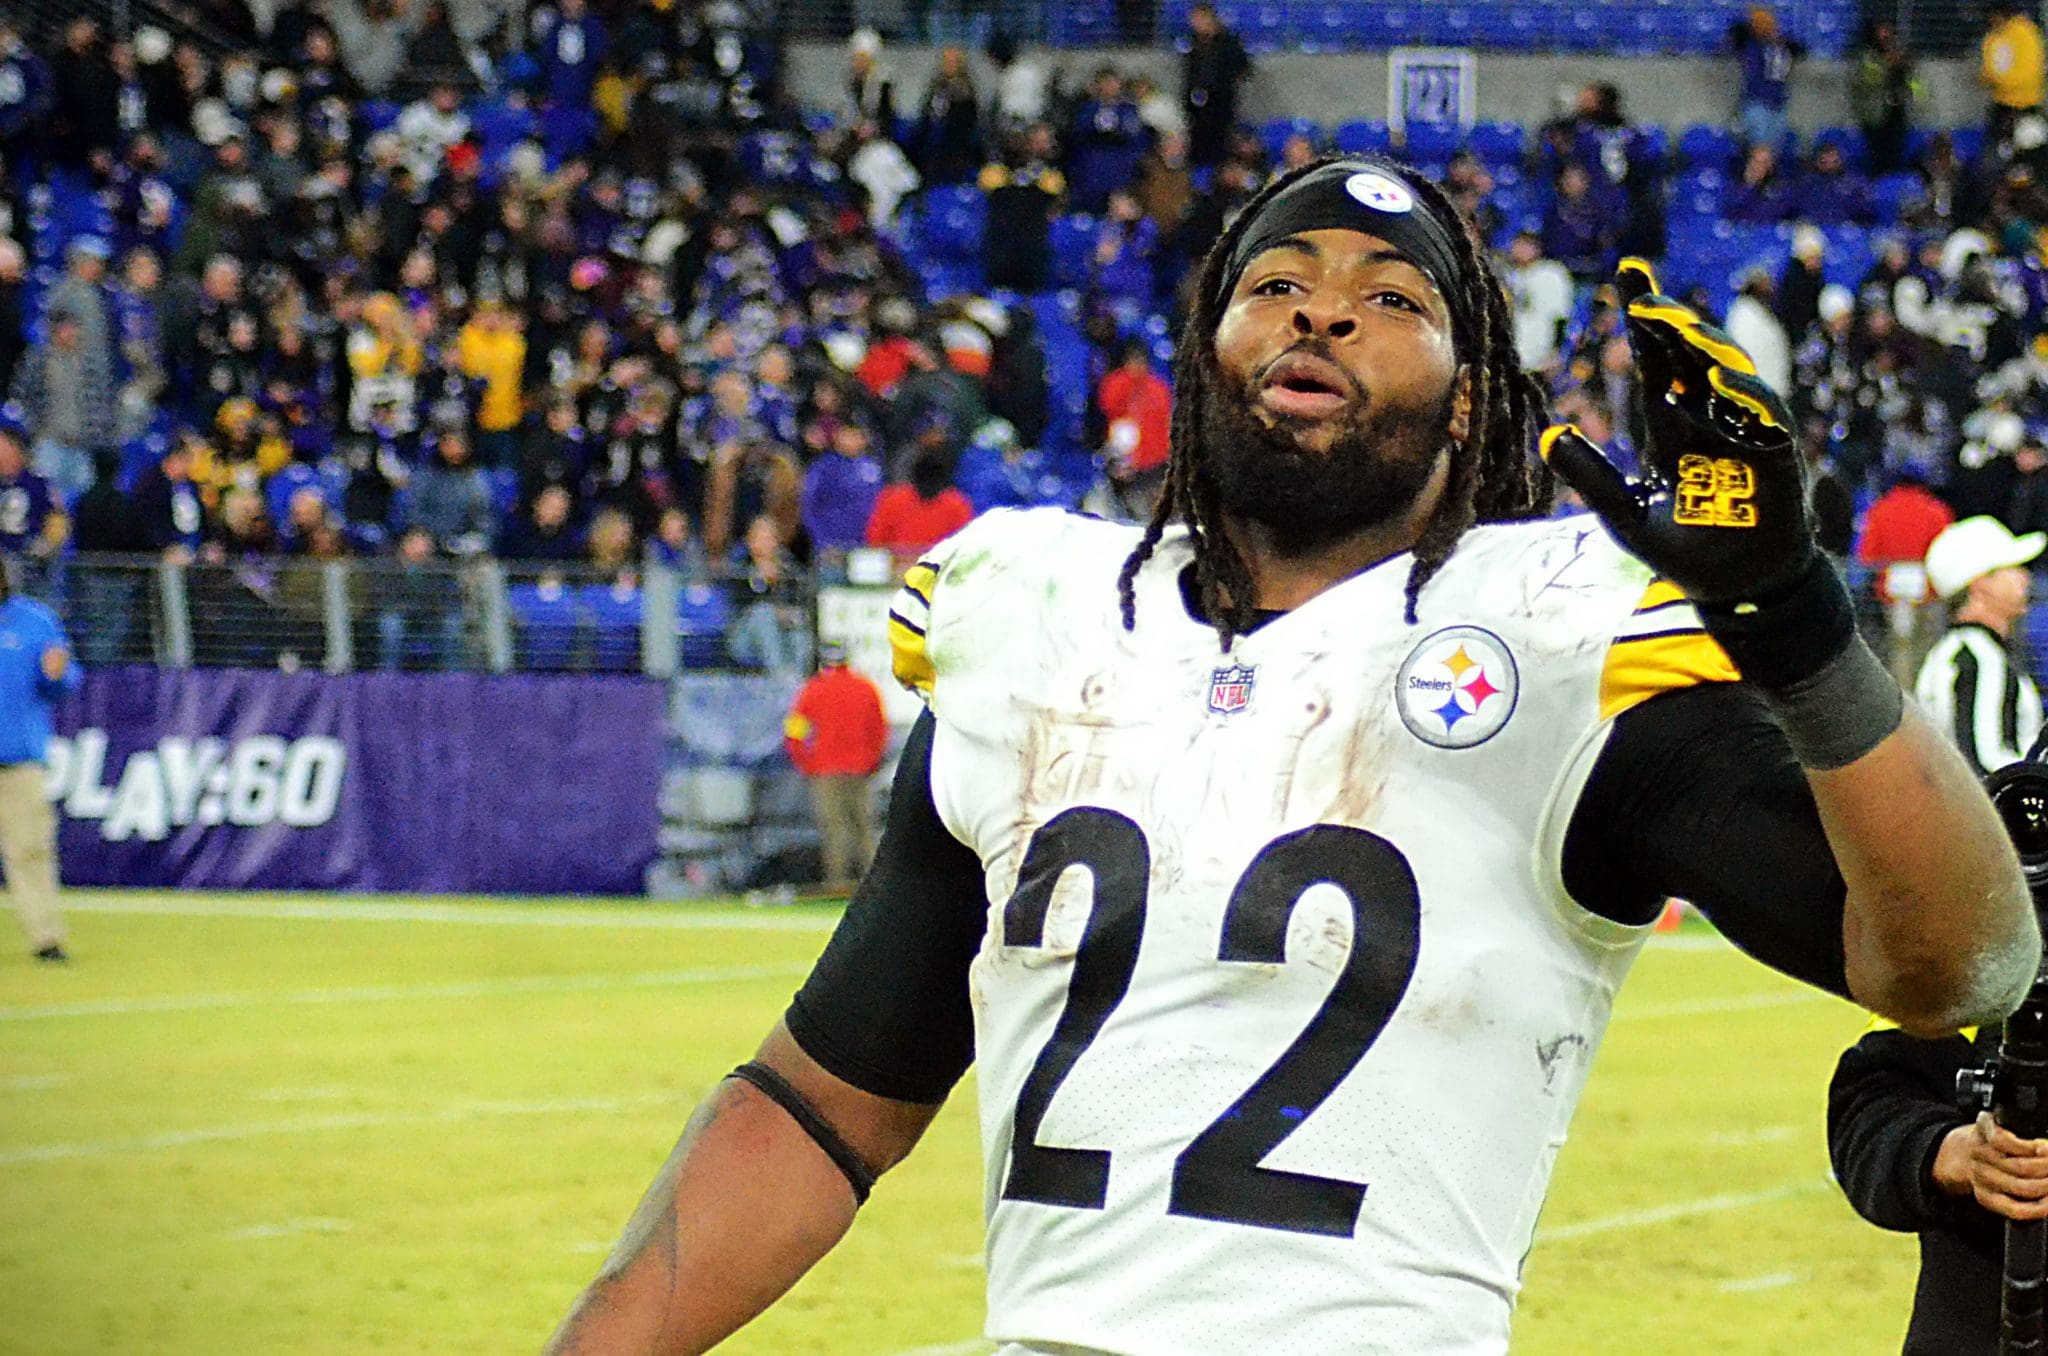 Steelers Najee Harris celebrates as the Steelers face the Ravens on Jan. 1, 2022 in Baltimore. (Mitchell Northam / Steelers Now)